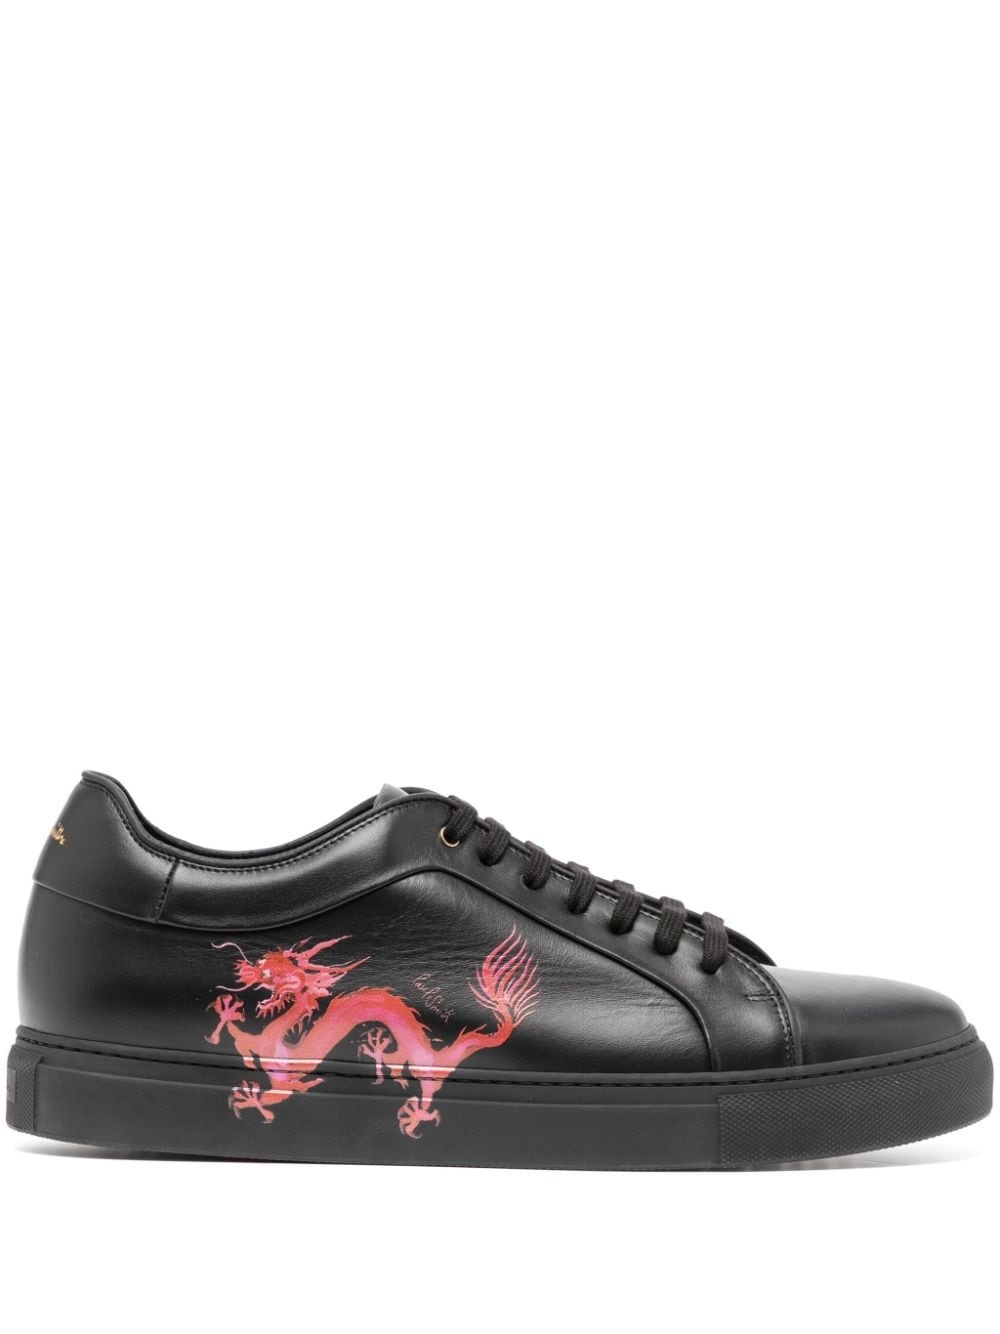 dragon-print leather sneakers - 1